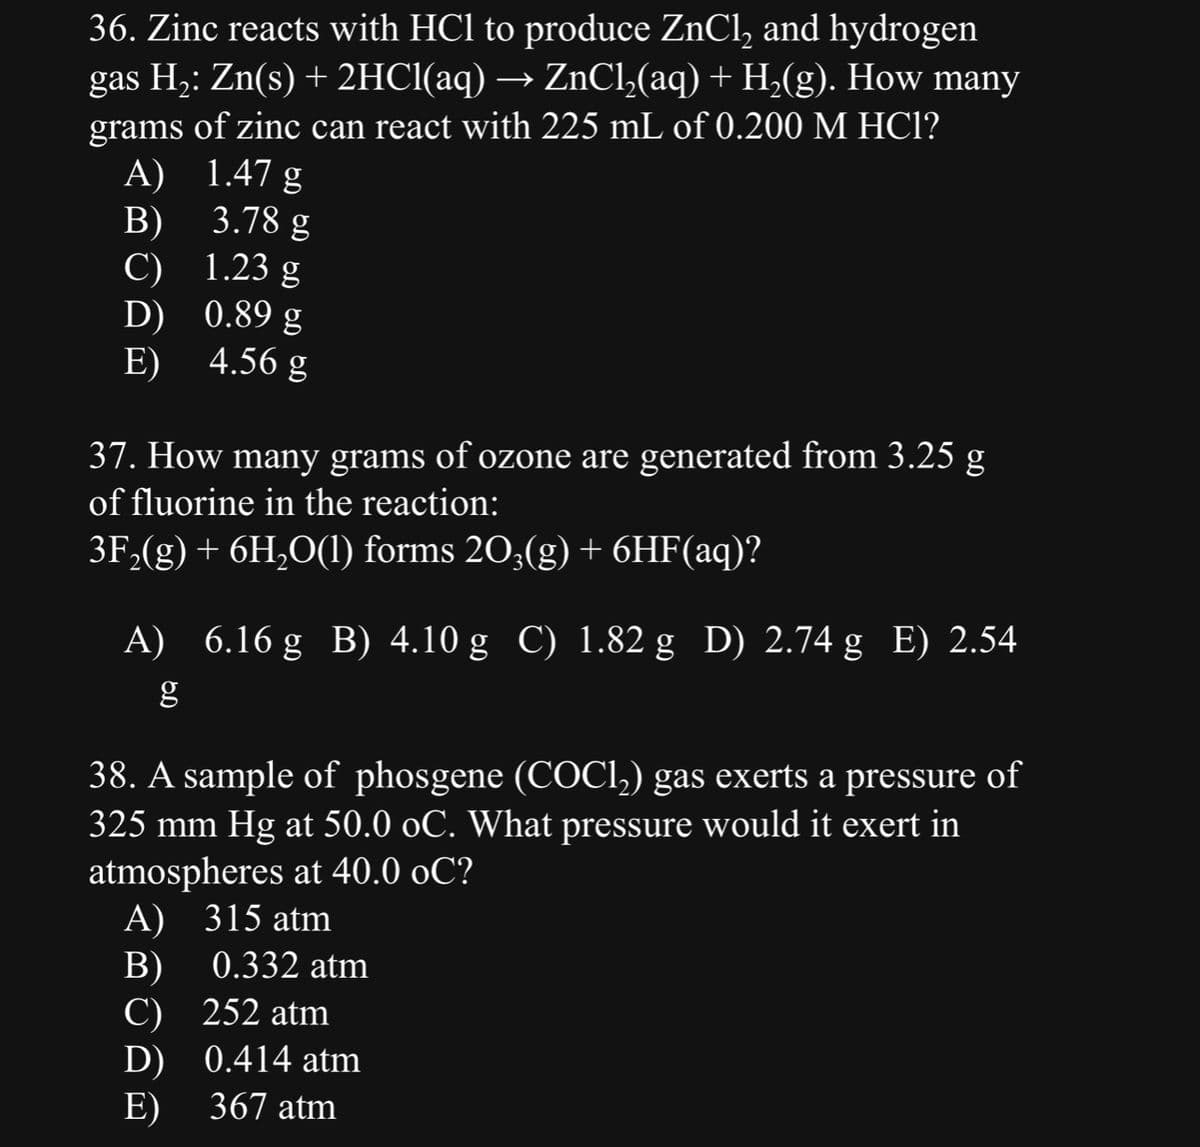 36. Zinc reacts with HCl to produce ZnCl₂ and hydrogen
gas H₂: Zn(s) + 2HCl(aq) → ZnCl₂(aq) + H₂(g). How many
grams of zinc can react with 225 mL of 0.200 M HCl?
A)
B)
C)
D)
E)
1.47 g
3.78 g
1.23 g
0.89 g
4.56 g
37. How many grams of ozone are generated from 3.25 g
of fluorine in the reaction:
3F₂(g) + 6H₂O(1) forms 203(g) + 6HF(aq)?
A) 6.16g B) 4.10 g C) 1.82 g D) 2.74 g E) 2.54
38. A sample of phosgene (COCl₂) gas exerts a pressure of
325 mm Hg at 50.0 oC. What pressure would it exert in
atmospheres at 40.0 oC?
A) 315 atm
B)
C) 252 atm
D)
E) 367 atm
0.332 atm
0.414 atm